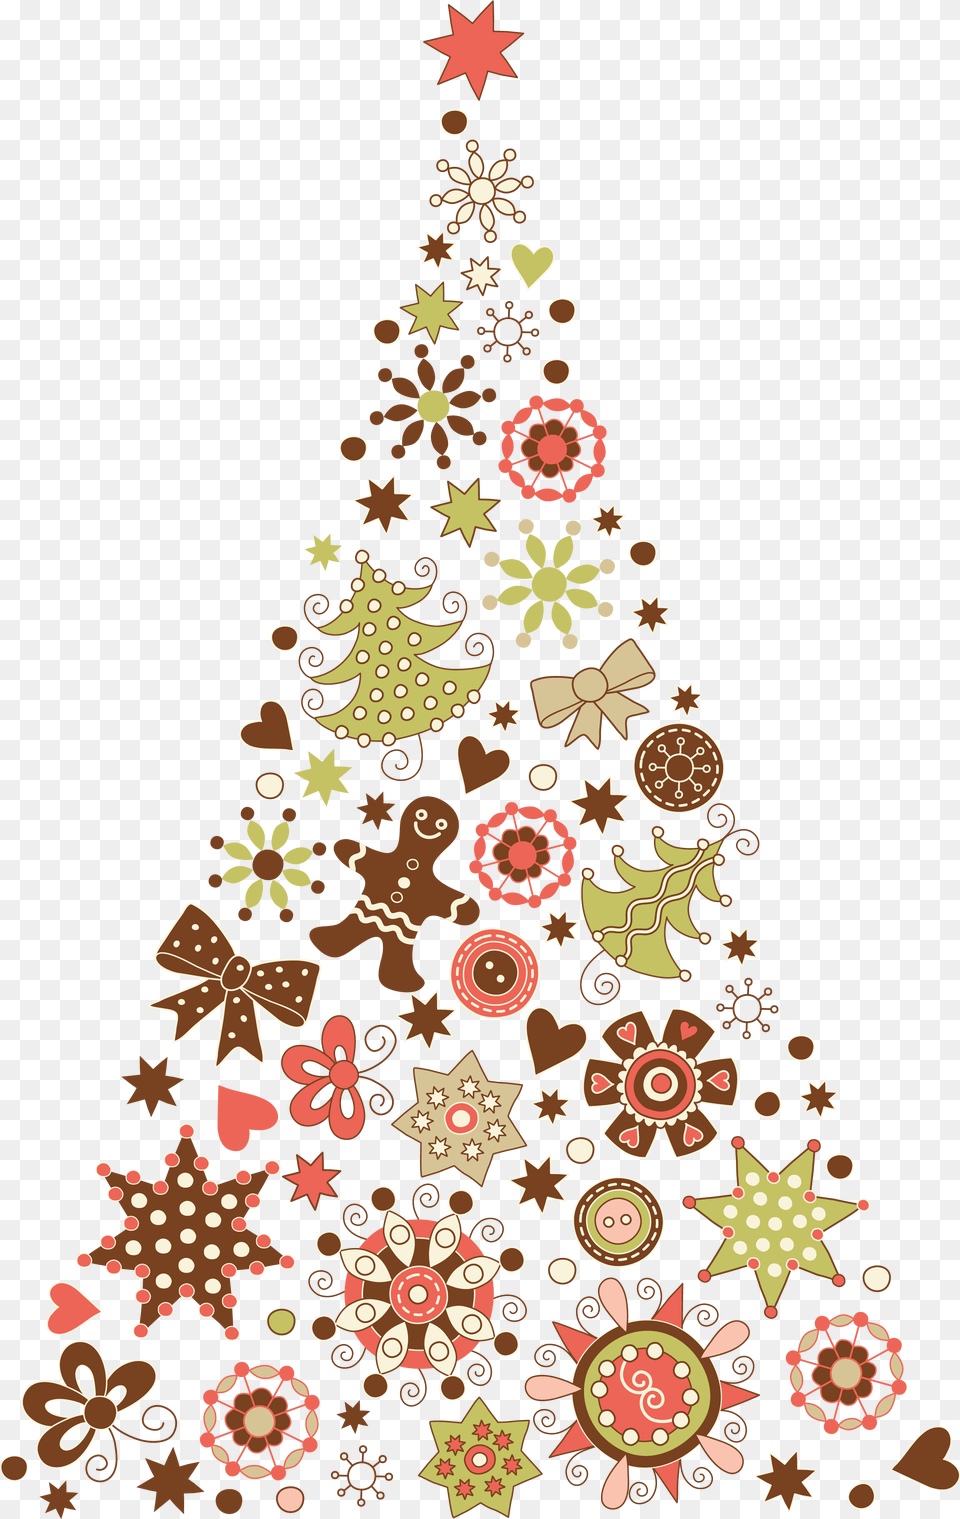 Christmas Wallpaper Iphone Email Business Christmas Card Christmas Card Wallpaper Hd, Christmas Decorations, Festival, Christmas Tree Png